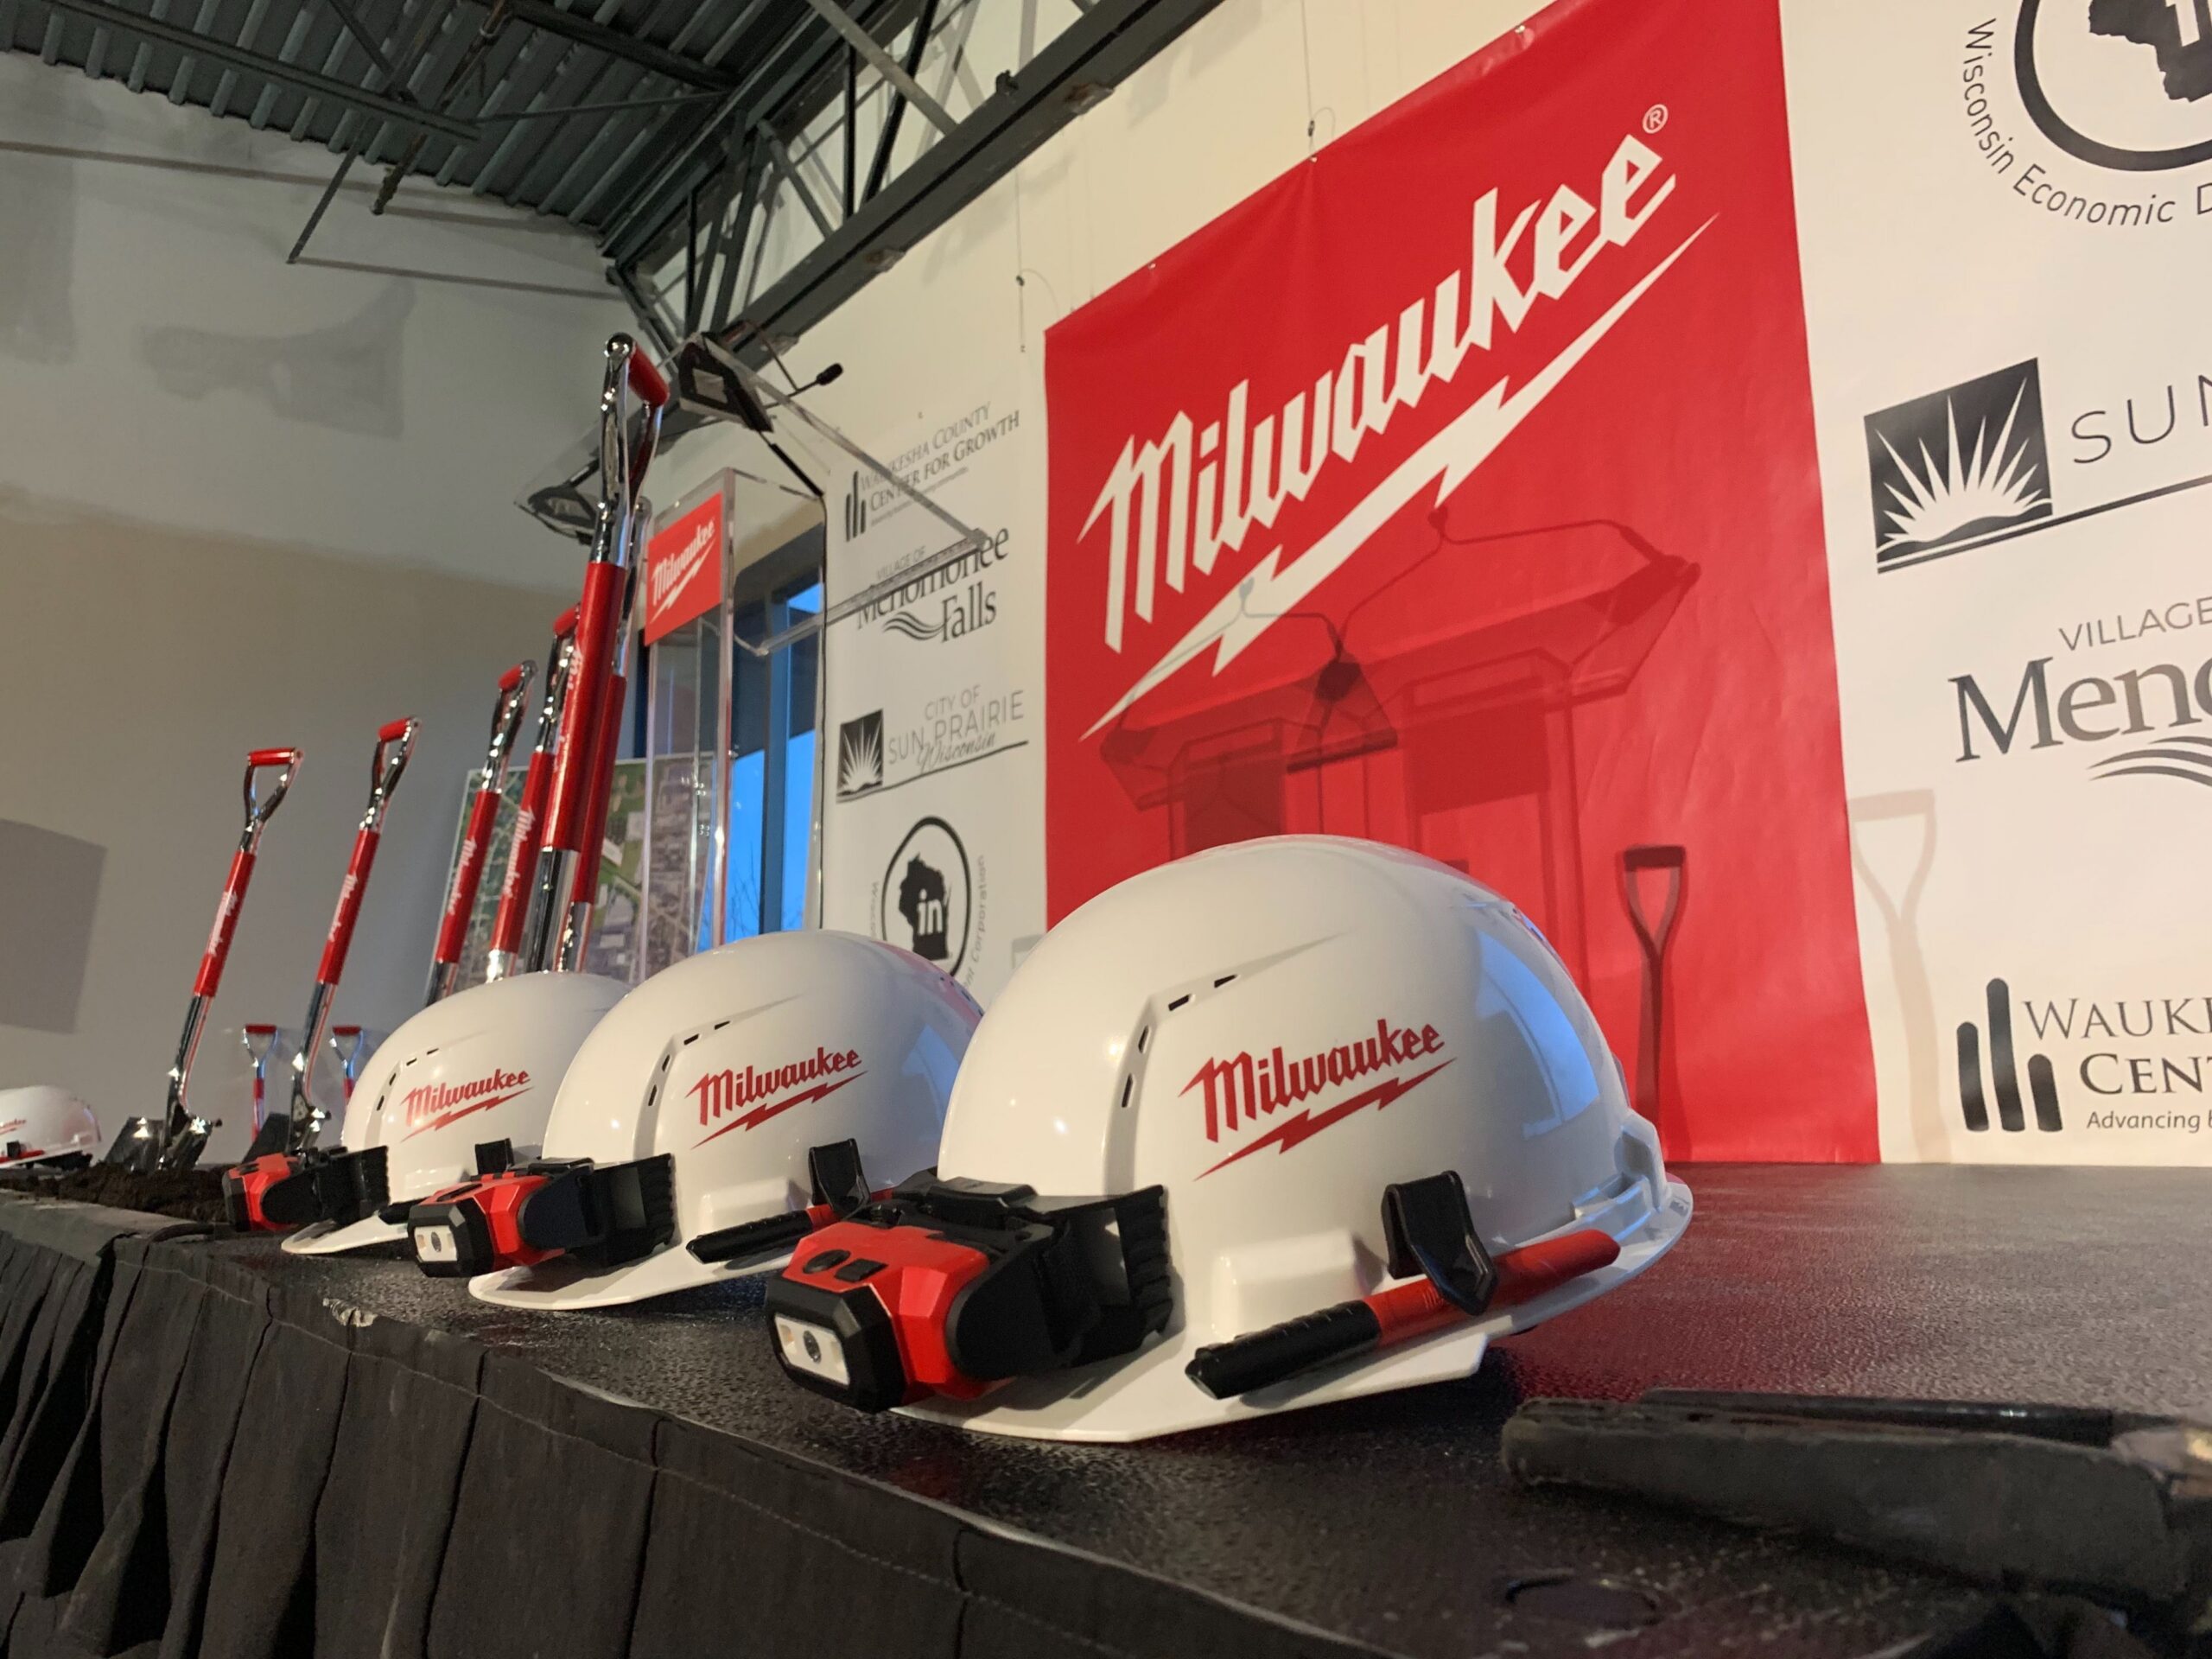 Hard hats and shovels are lined up at a groundbreaking event for Milwaukee Tool’s new facility in Menomonee Falls